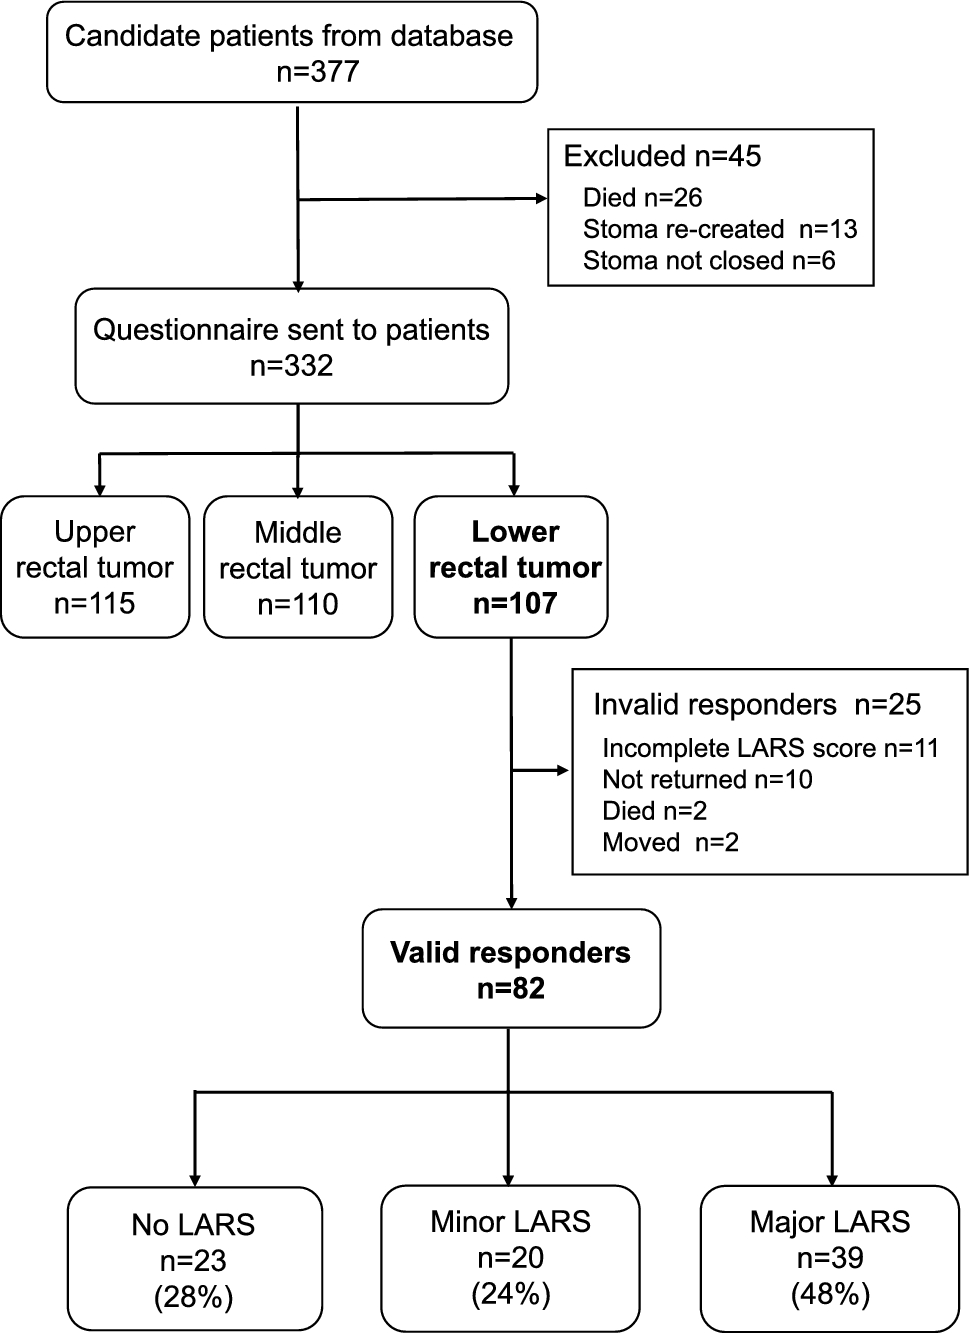 Incidence of low anterior resection syndrome and its association with the quality of life in patients with lower rectal tumors